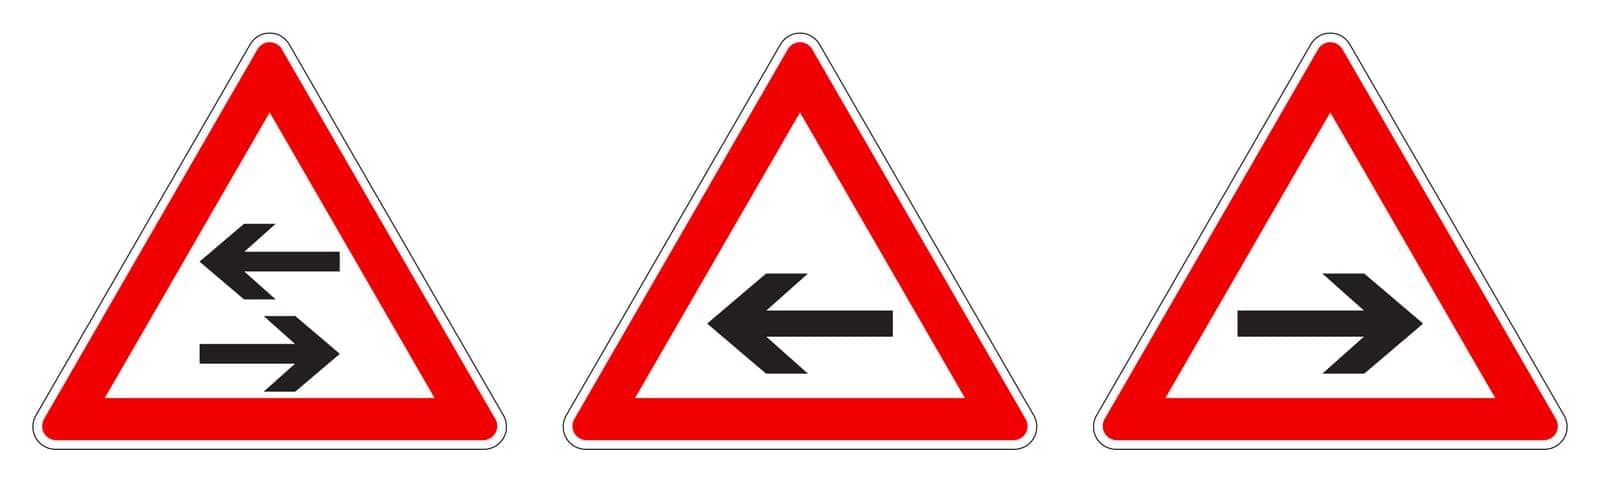 Warning - single/two way traffic sign. Black arrow in red triangle, version with arrow pointing left, right and both ways. by Ivanko